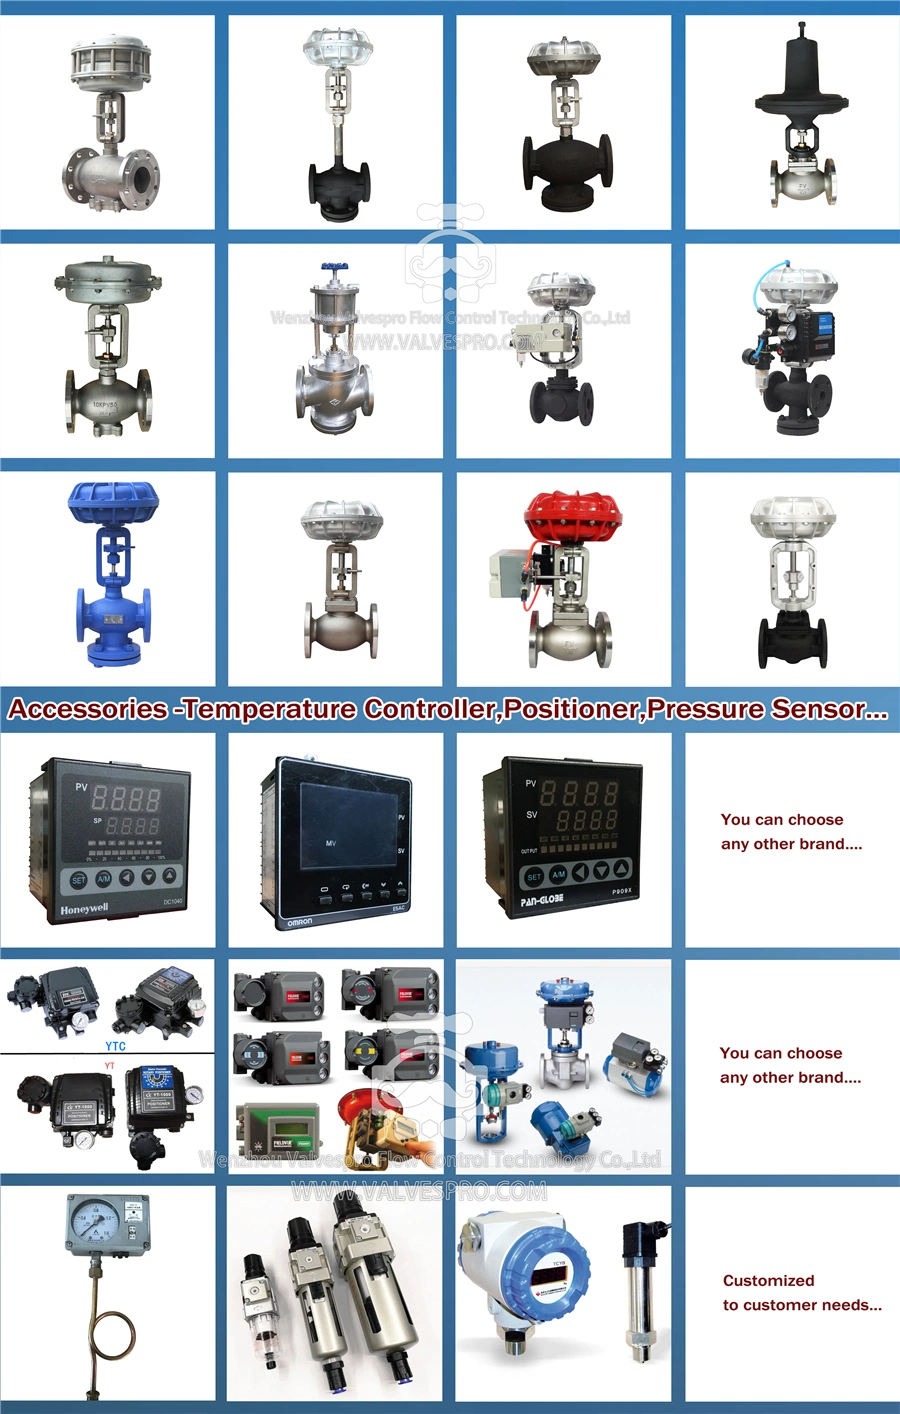 Pneumatic Control Valve Single Seat Sleeve Type Pneumatic Diaphragm Control Valve Regulating Valve for Steam and Hot Oil Cast Steel or Ss Class150 Pn16 JIS10K